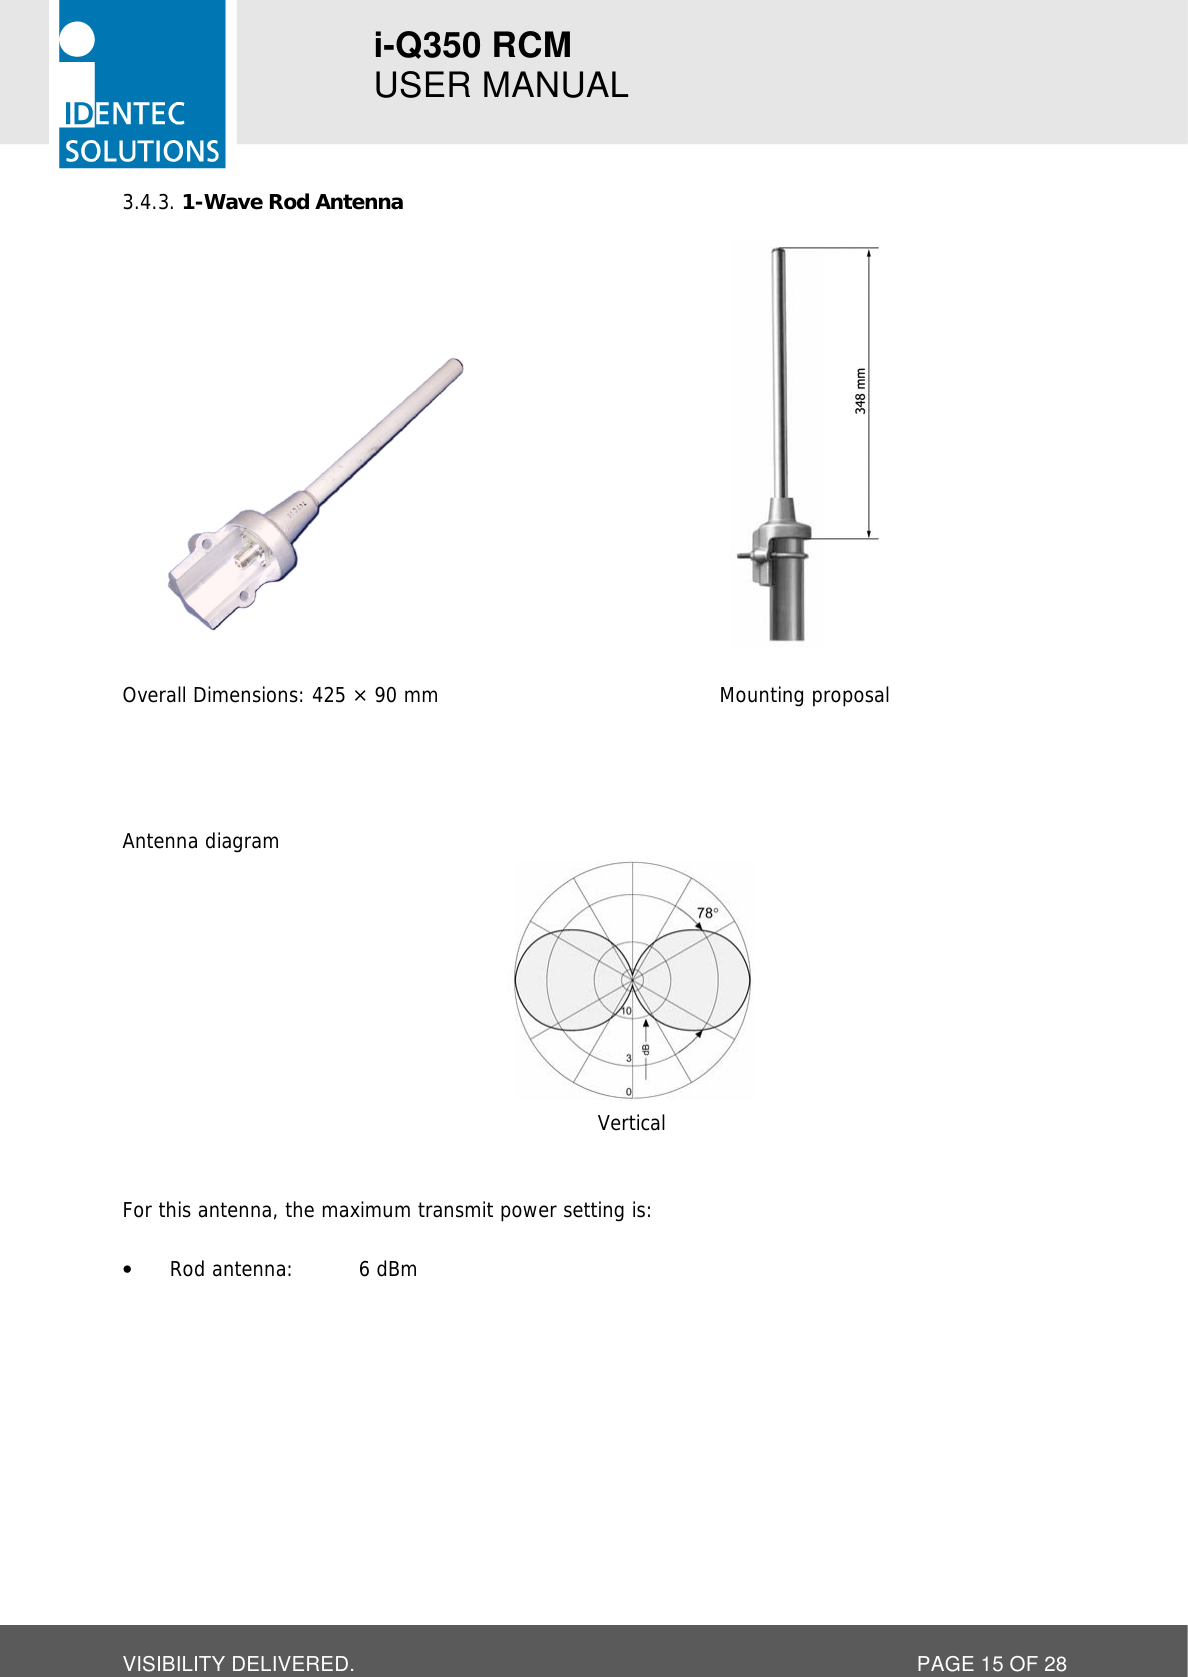 i-Q350 RCM   USER MANUAL  VISIBILITY DELIVERED.  PAGE 15 OF 28  1-Wave Rod Antenna 3.4.3.             Overall Dimensions: 425 × 90 mm      Mounting proposal     Antenna diagram  Vertical   For this antenna, the maximum transmit power setting is:  • Rod antenna:    6 dBm 